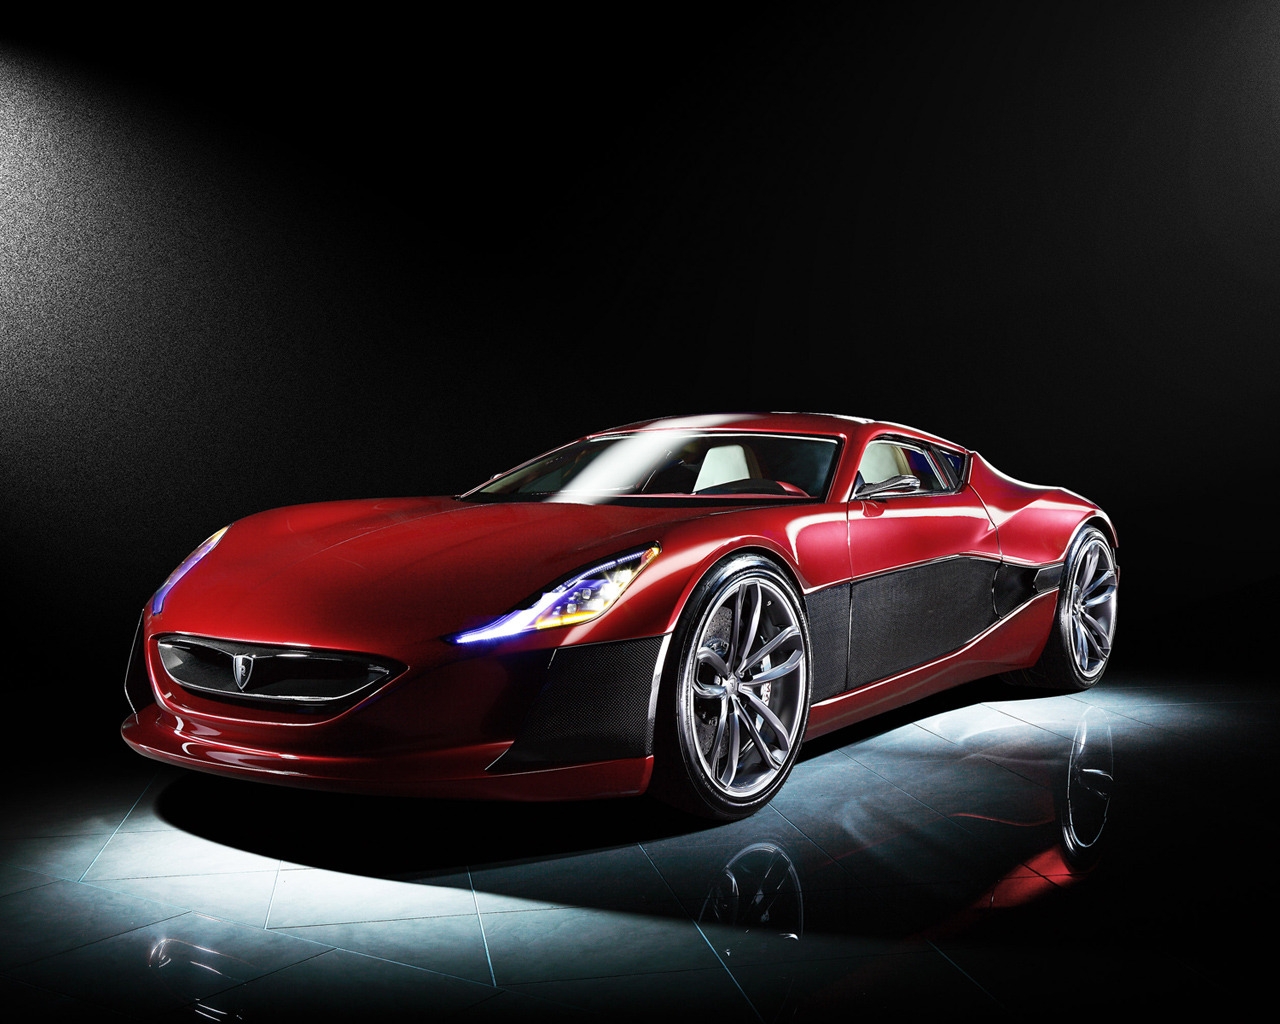 Rimac Concept One for 1280 x 1024 resolution